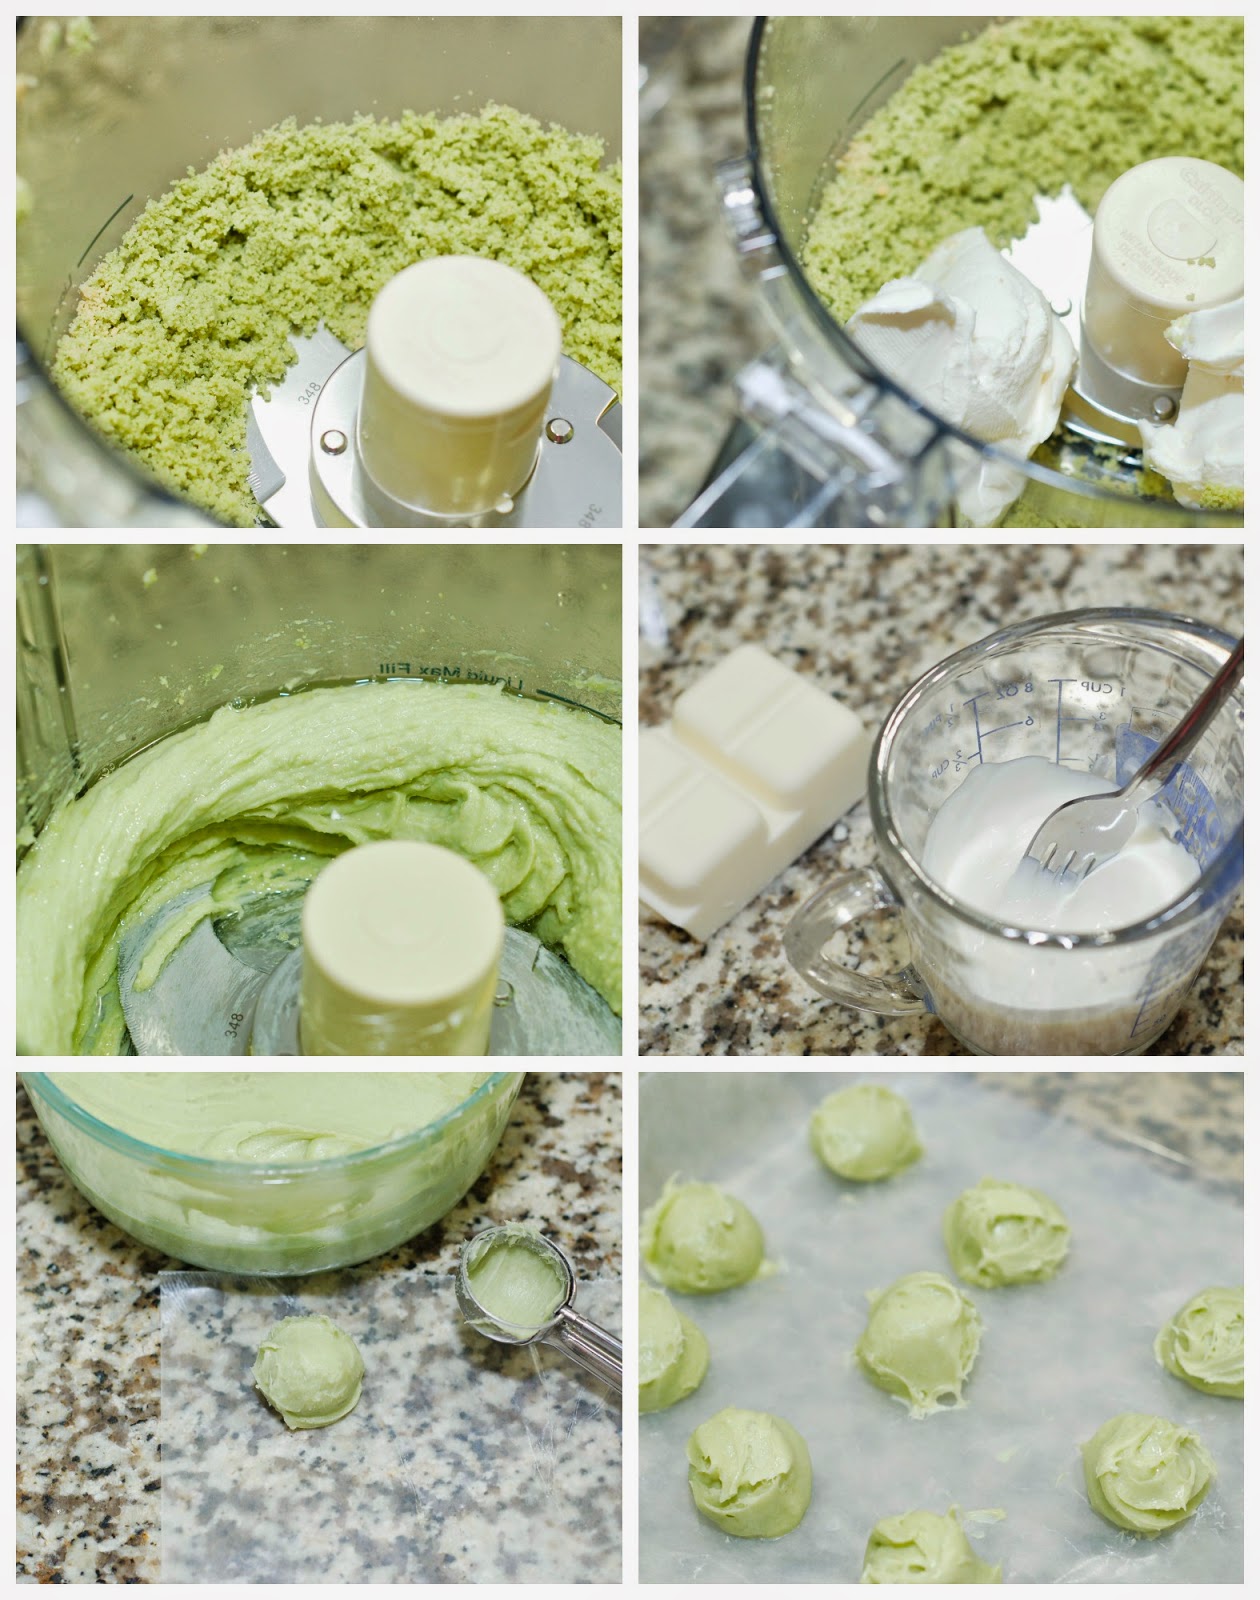 Making Tequila Lime Truffles by The Sweet Chick